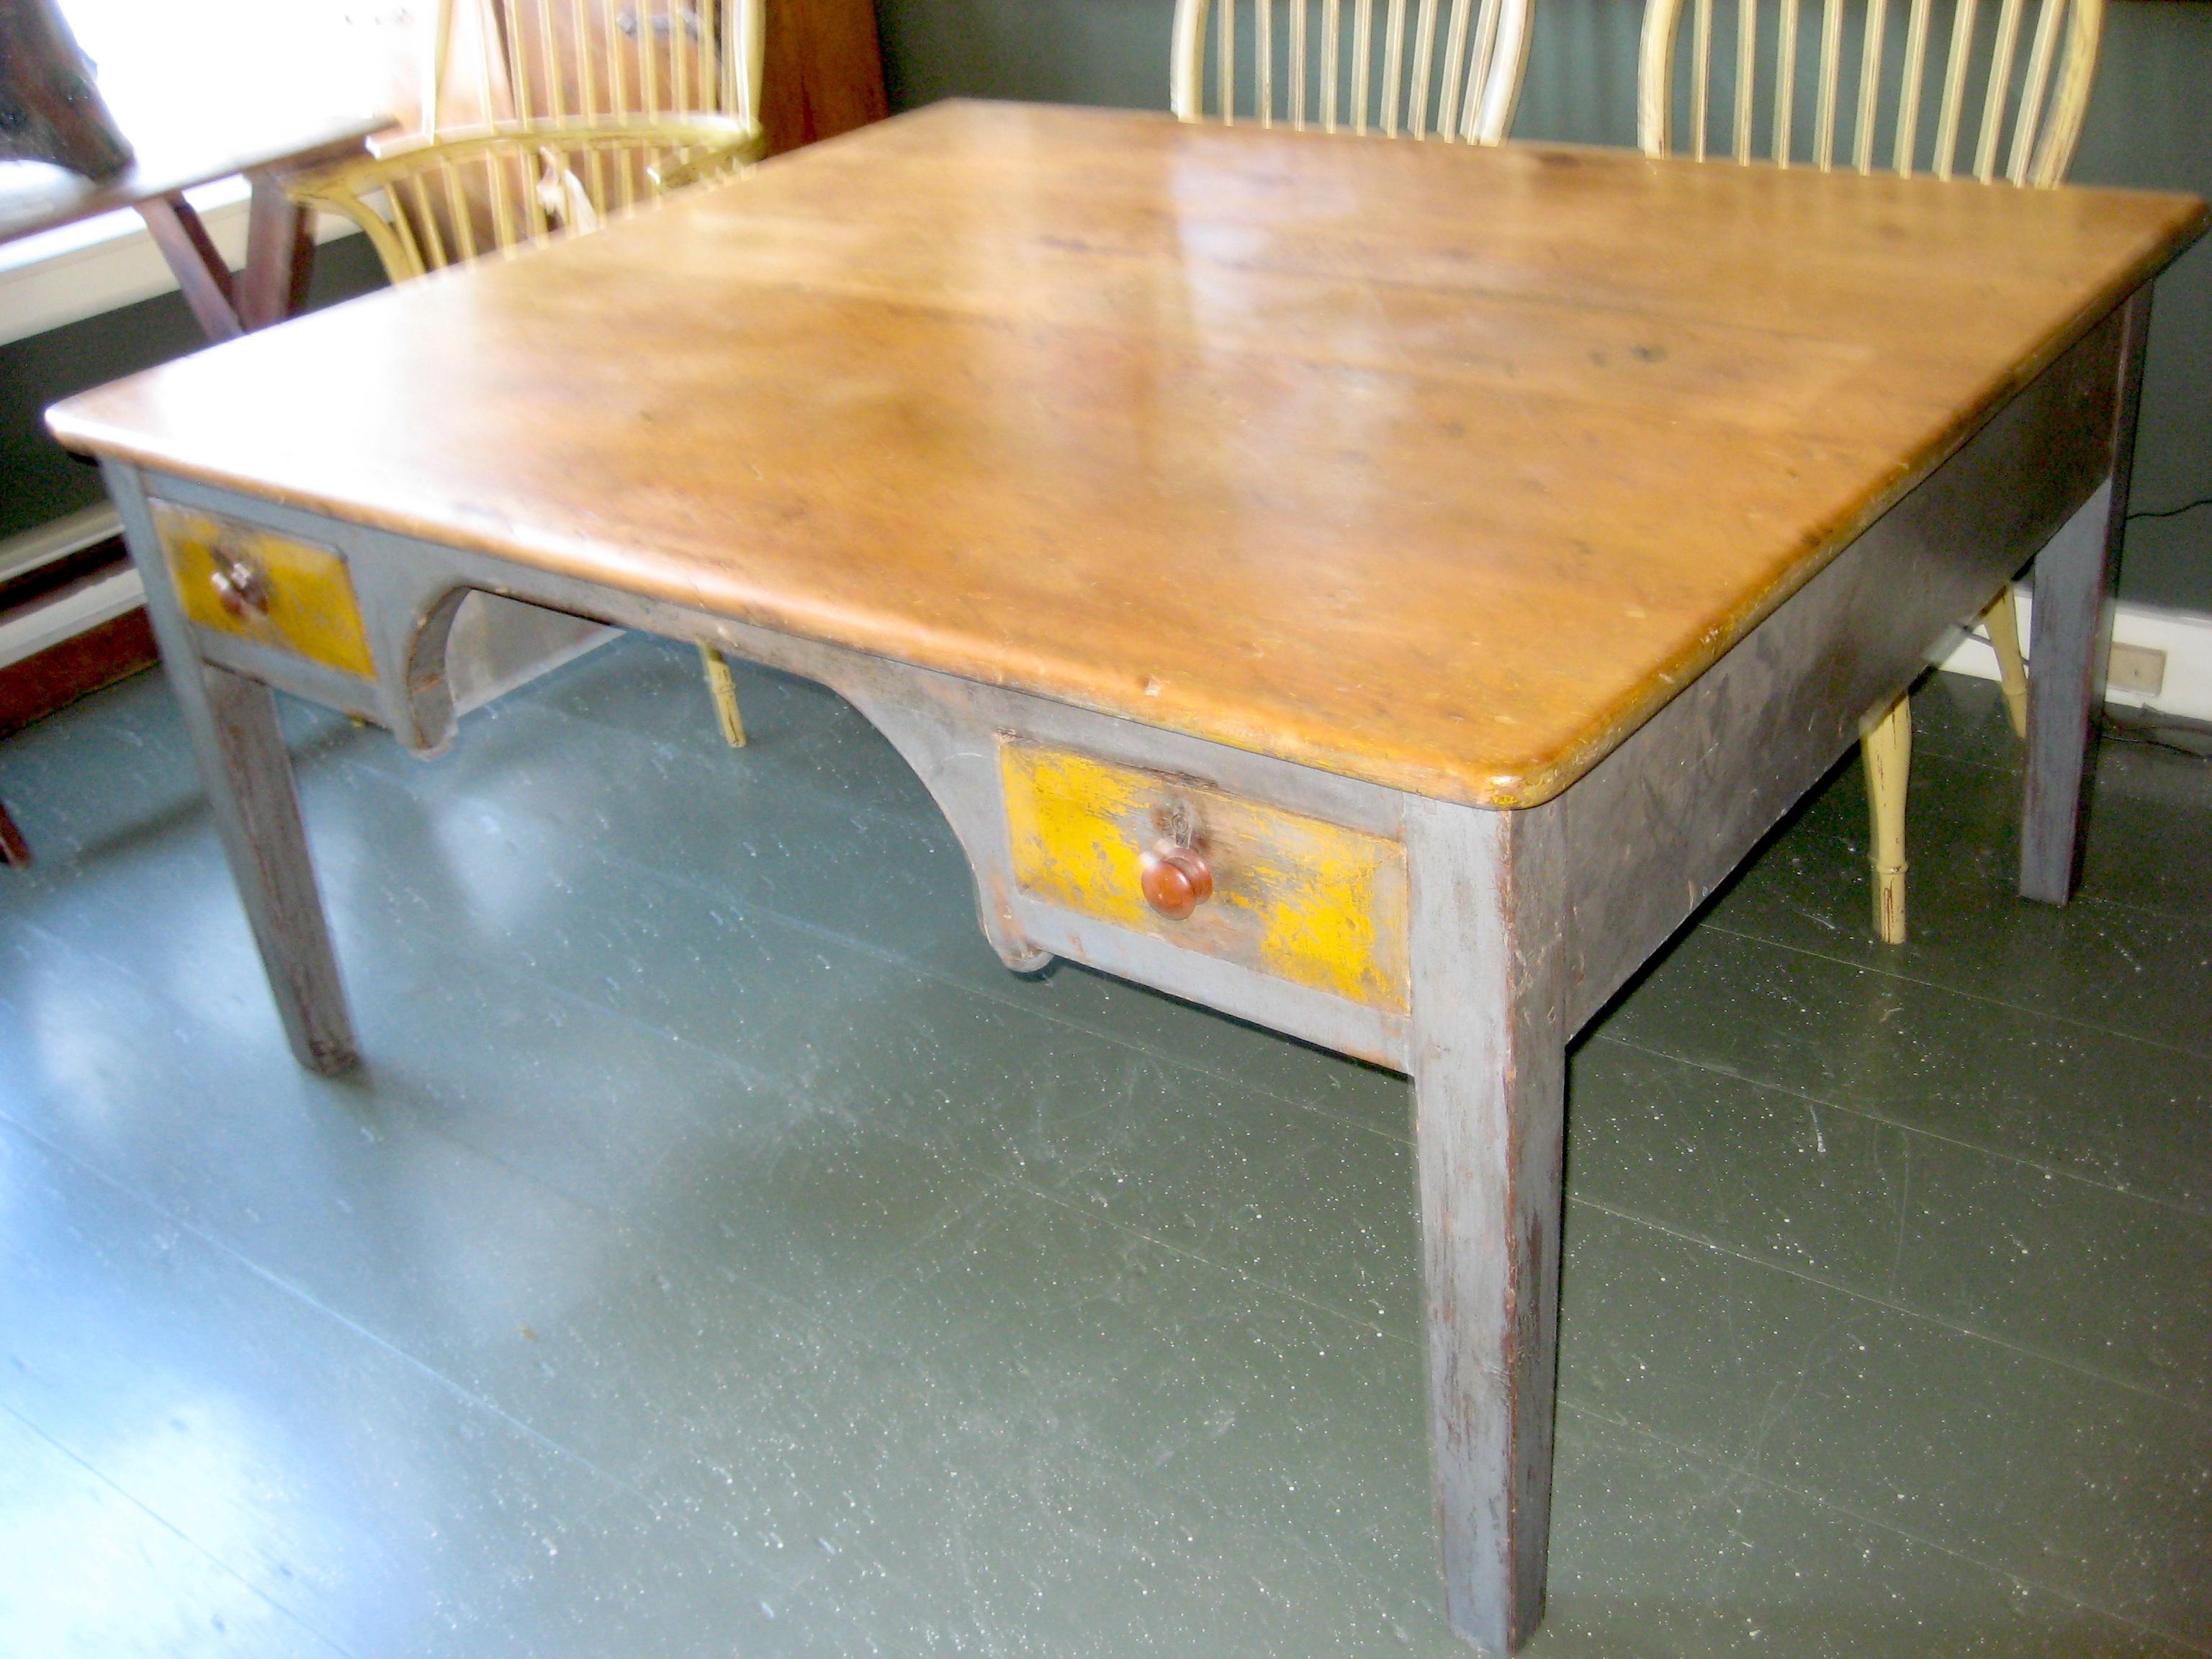 North American Large Desk-Table in Original Gray/Ochre Paint